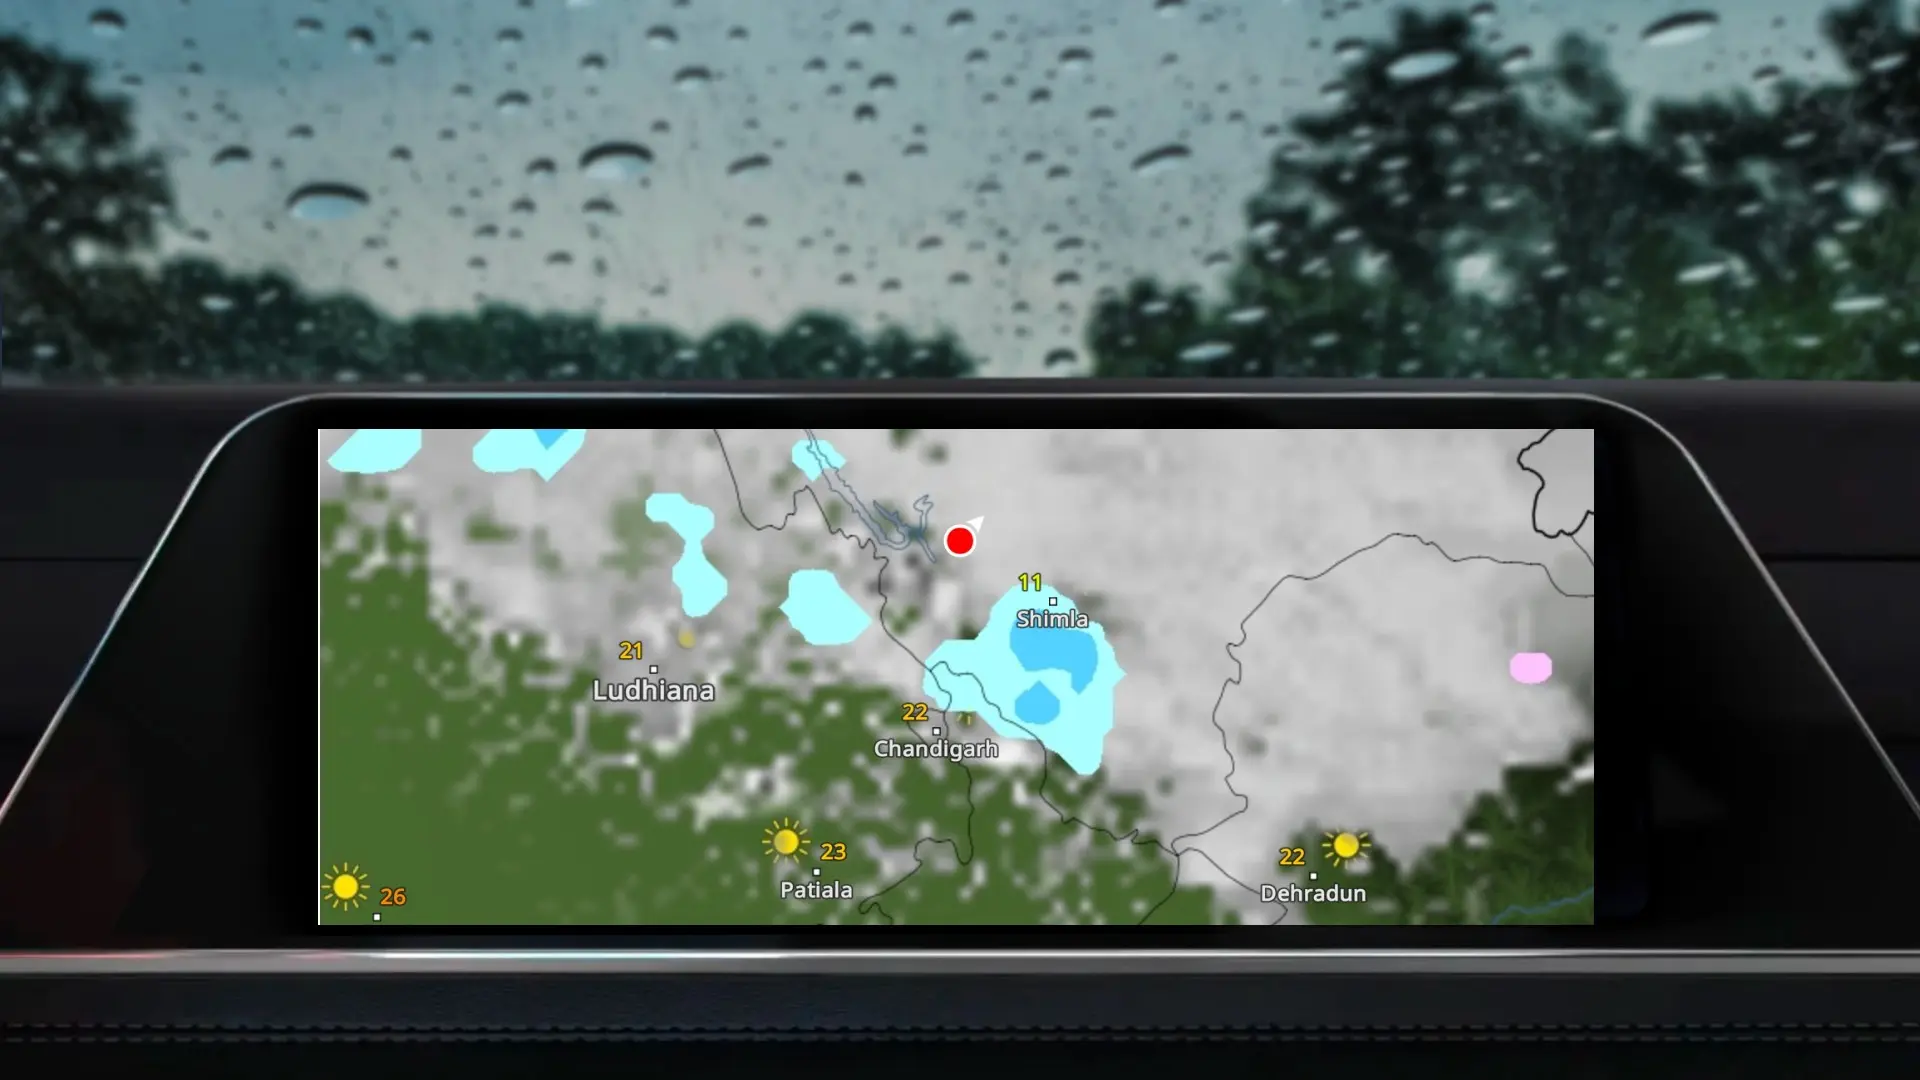 Weather & Radar for Android Auto helps you navigate the weather on NHs